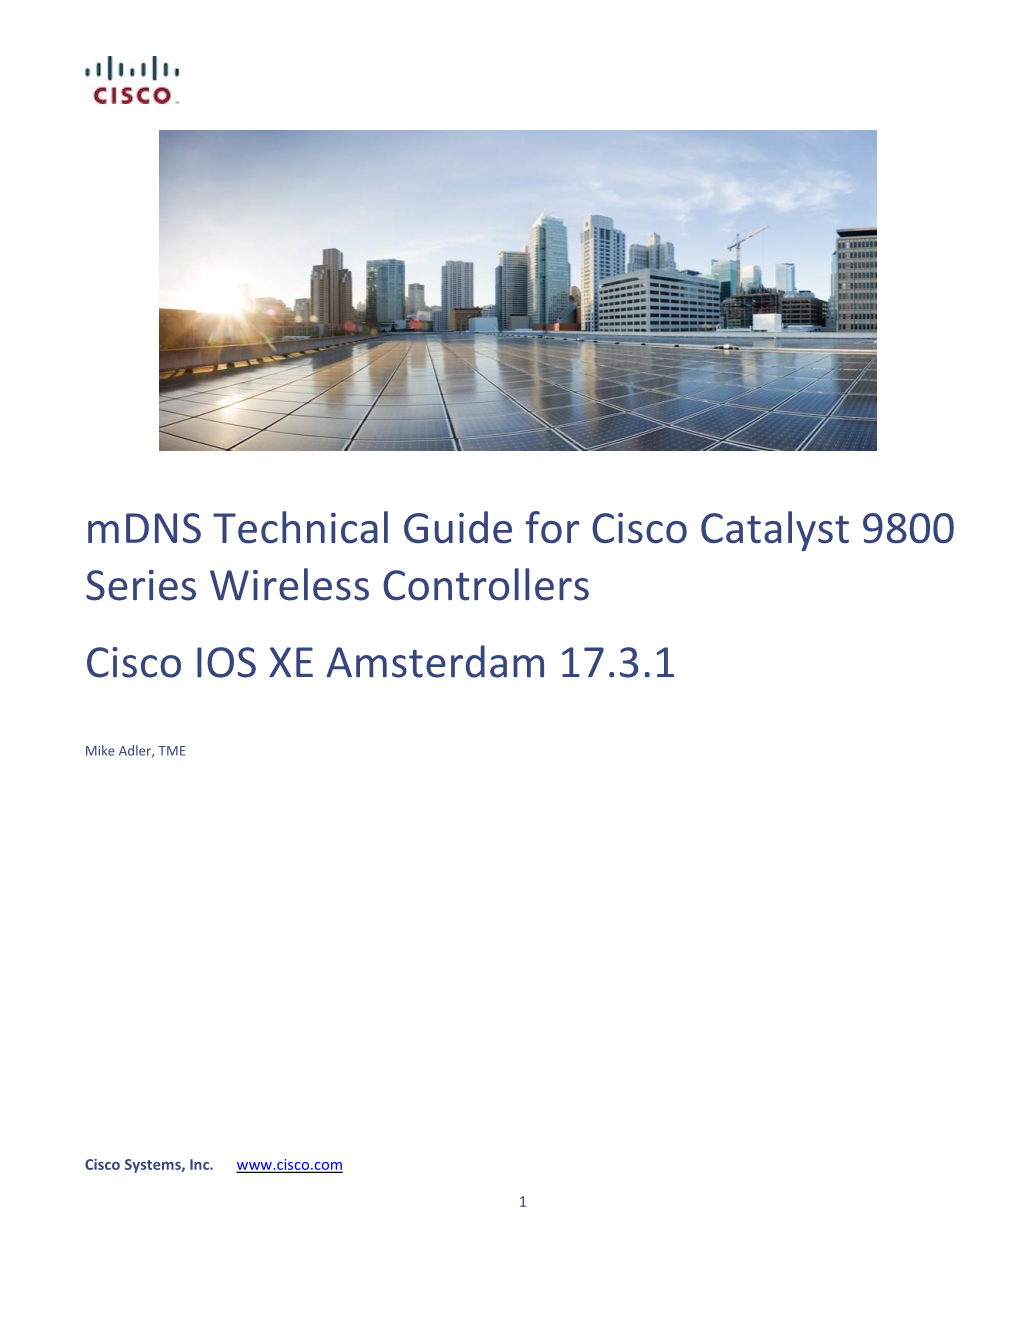 Cisco Mdns Technical Guide for Cisco Catalyst 9800 Series